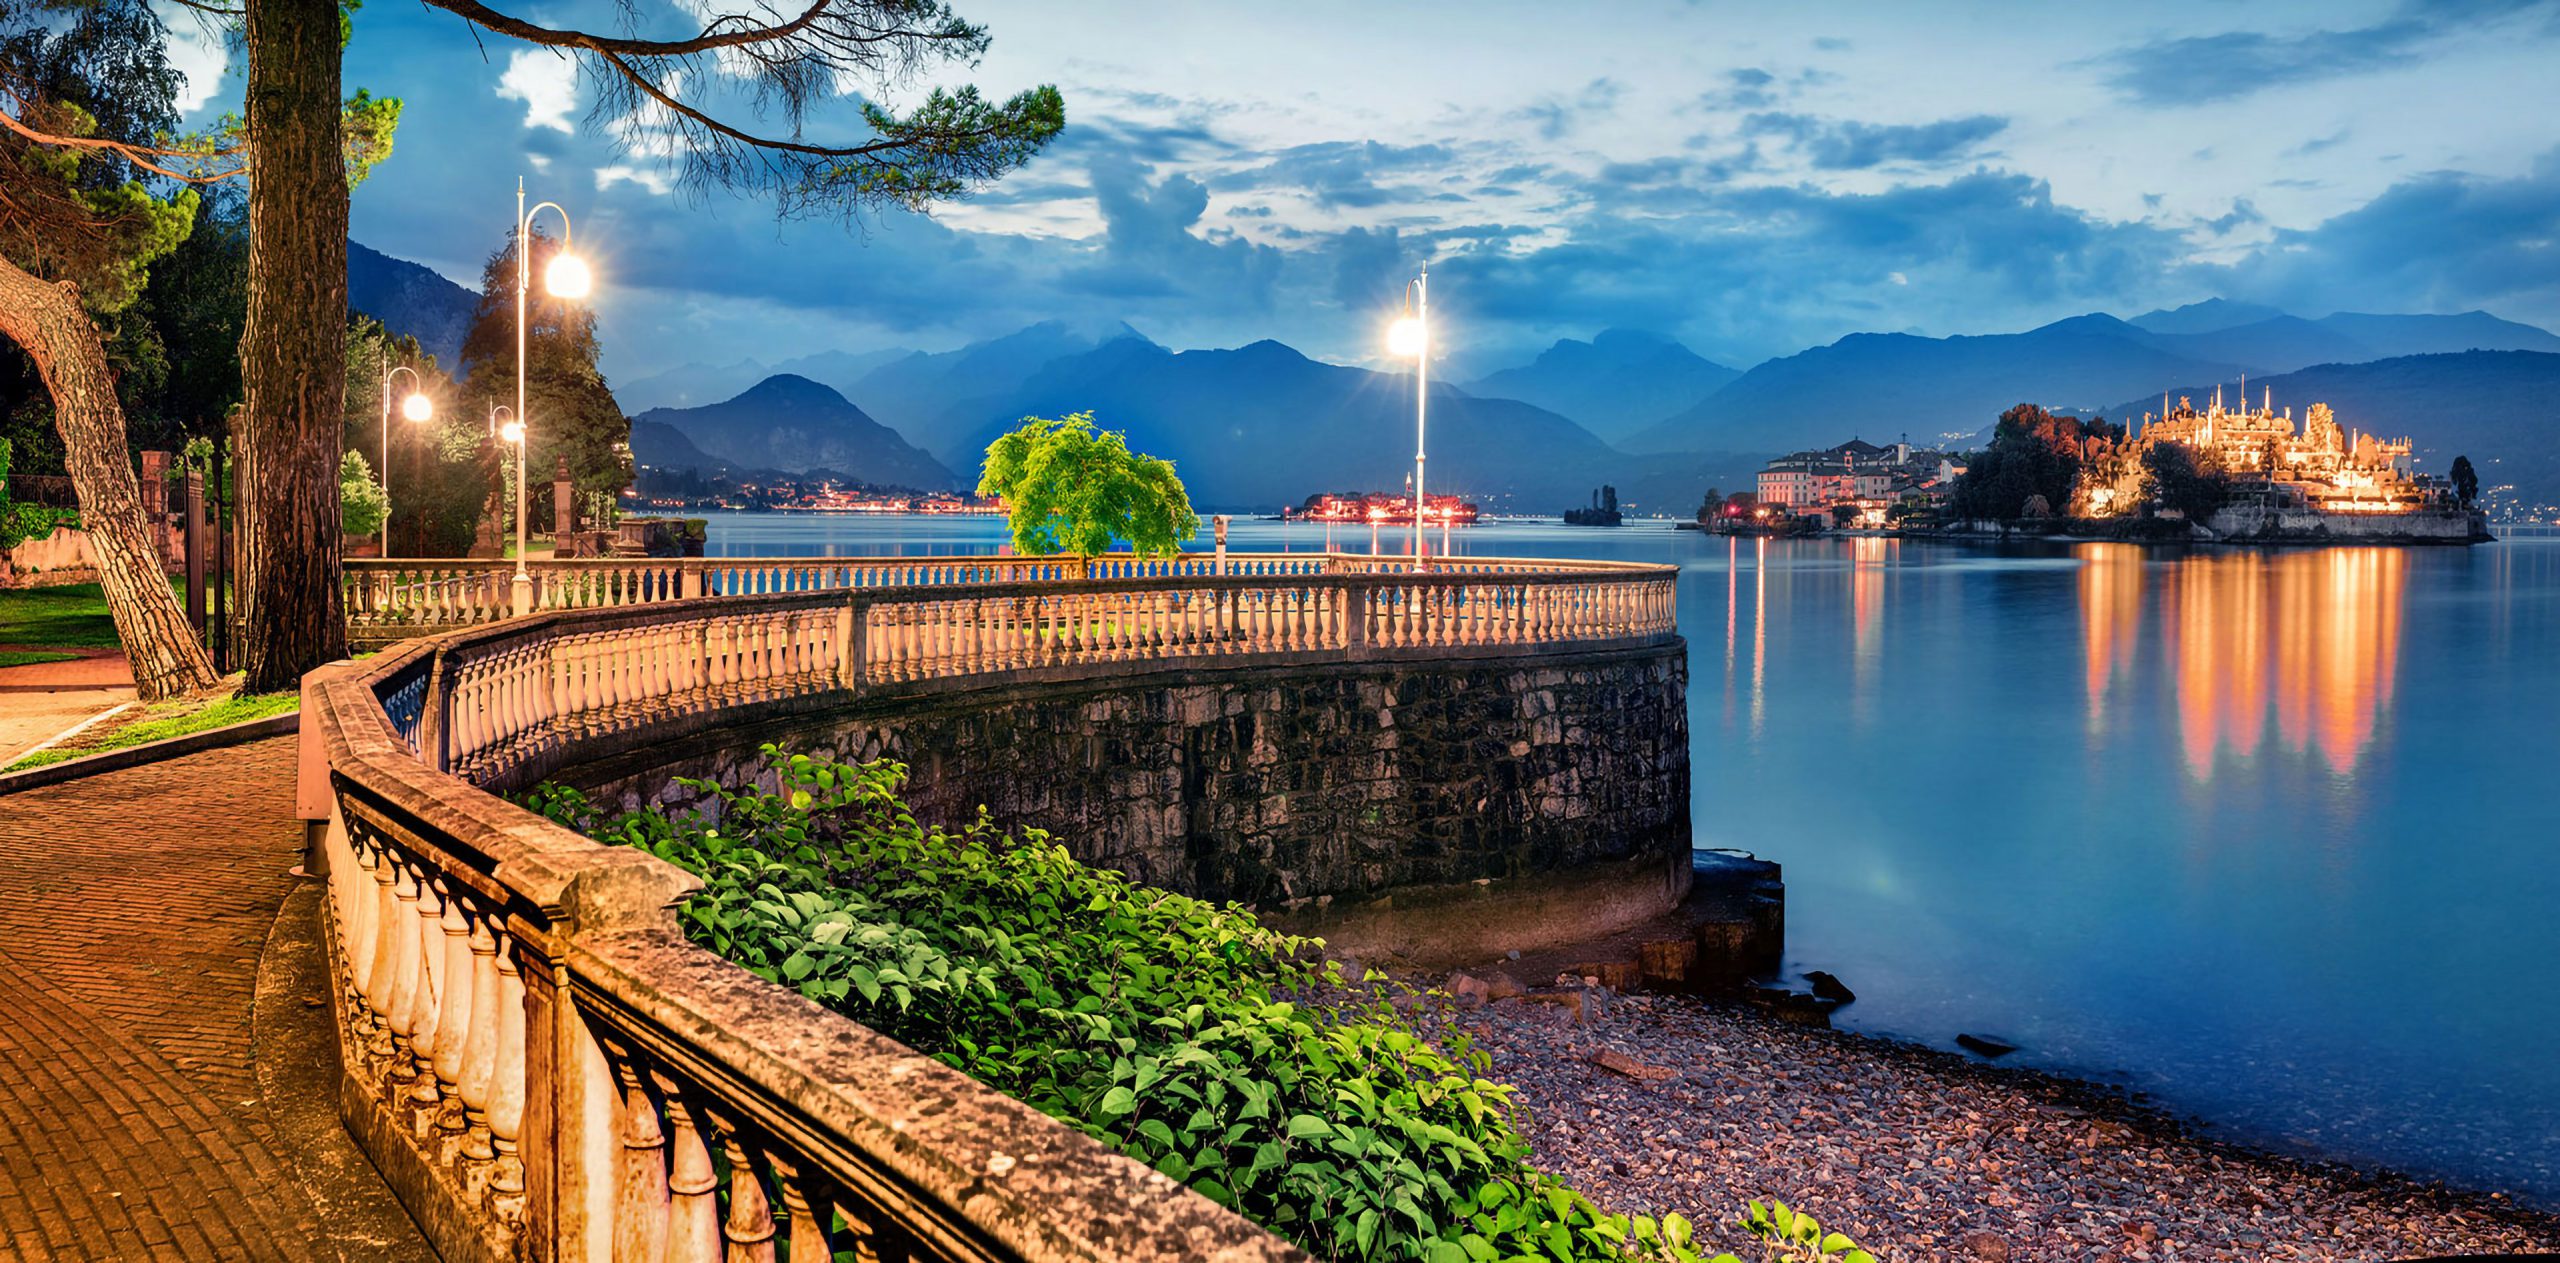 Great evening cityscape of Stresa town. Picturesque summer susns